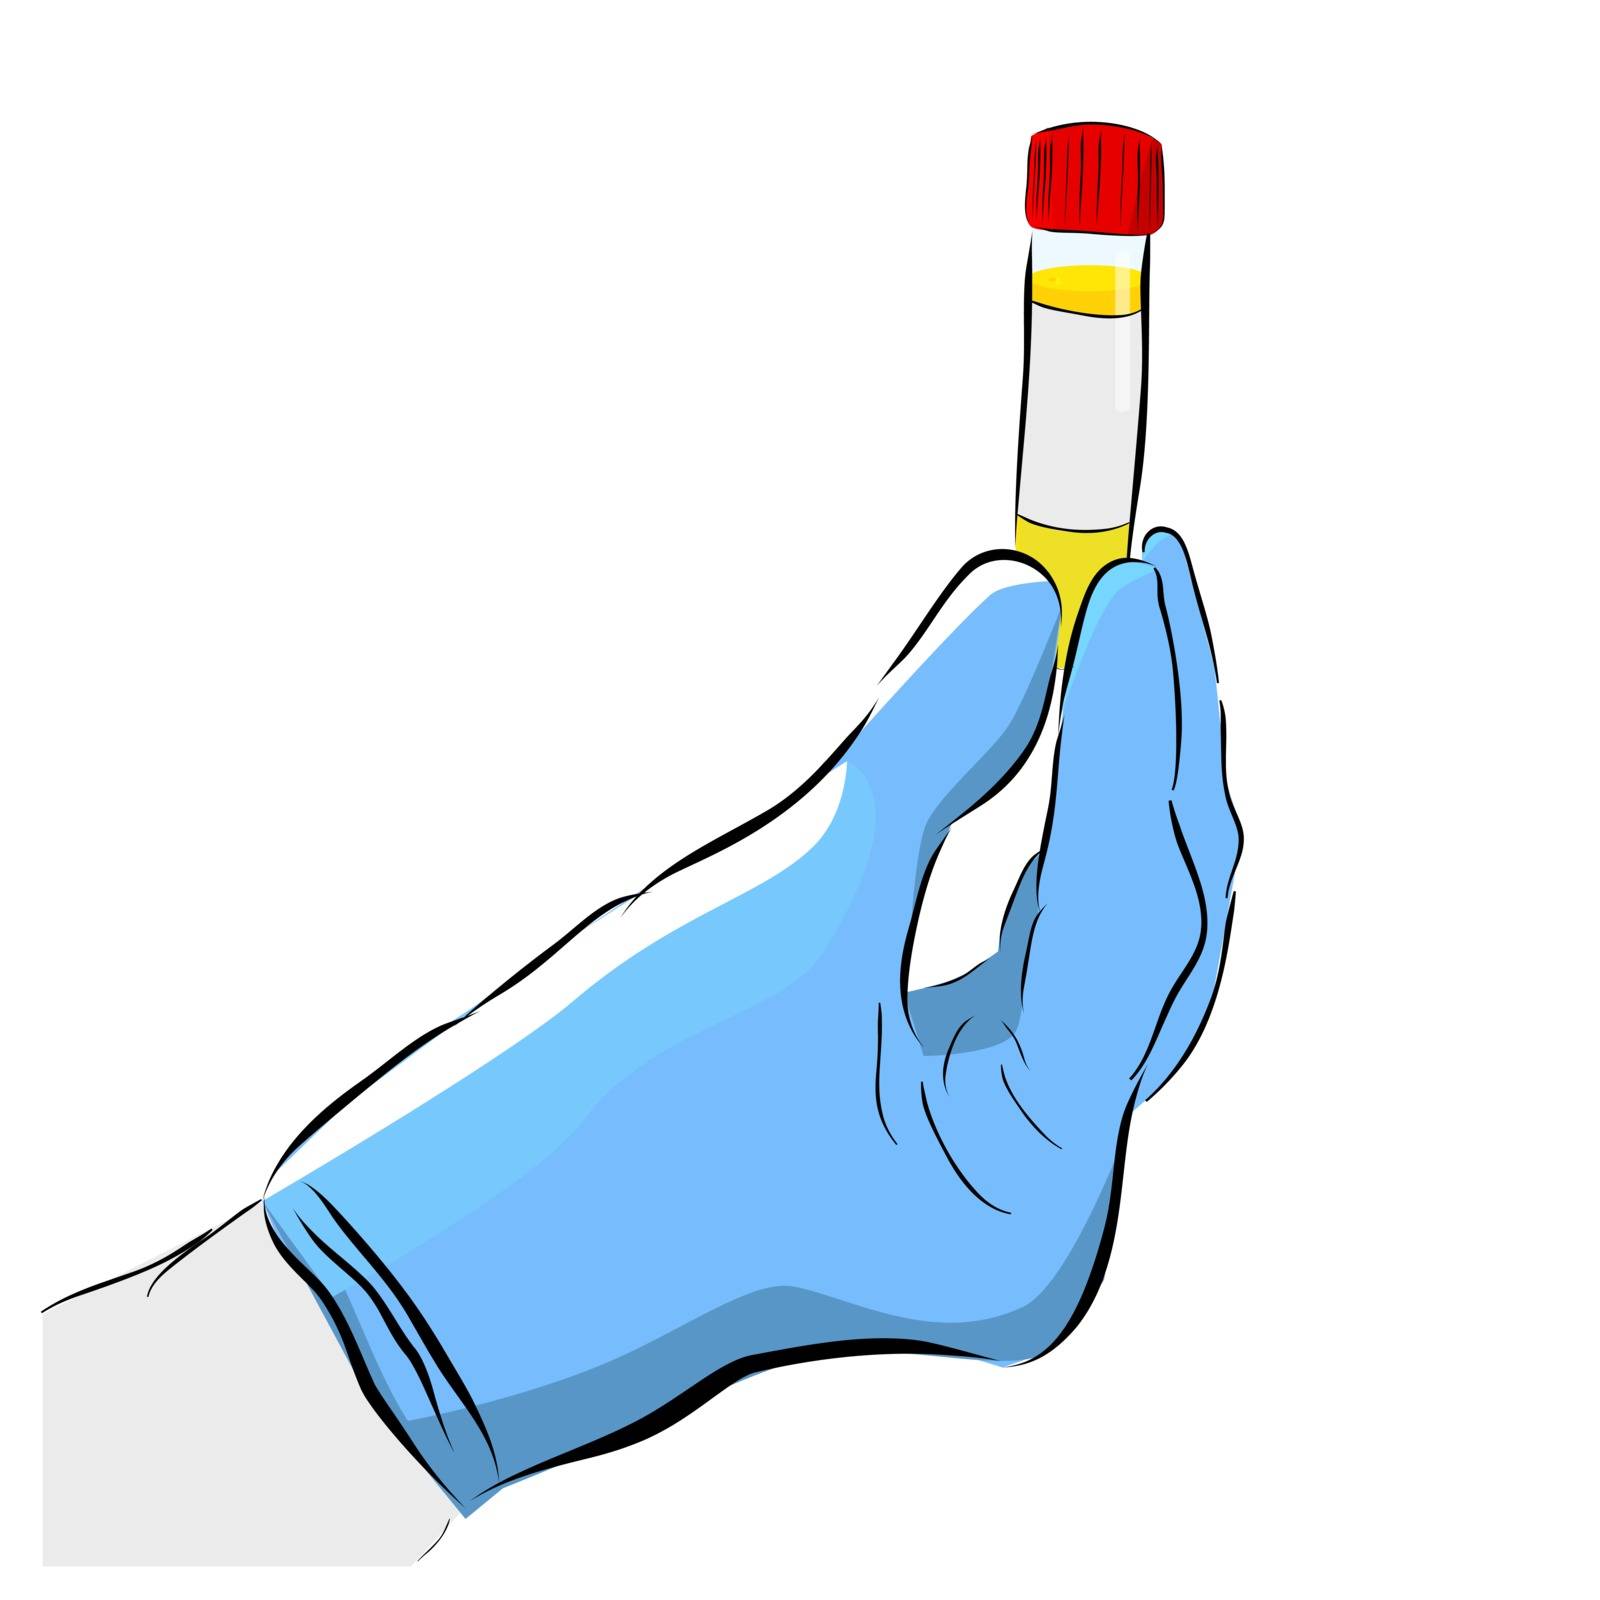 Simple Conceptual Hand Draw Sketch Vector, doctor hand holding plastic testing tube, Isolated on White by om_yos